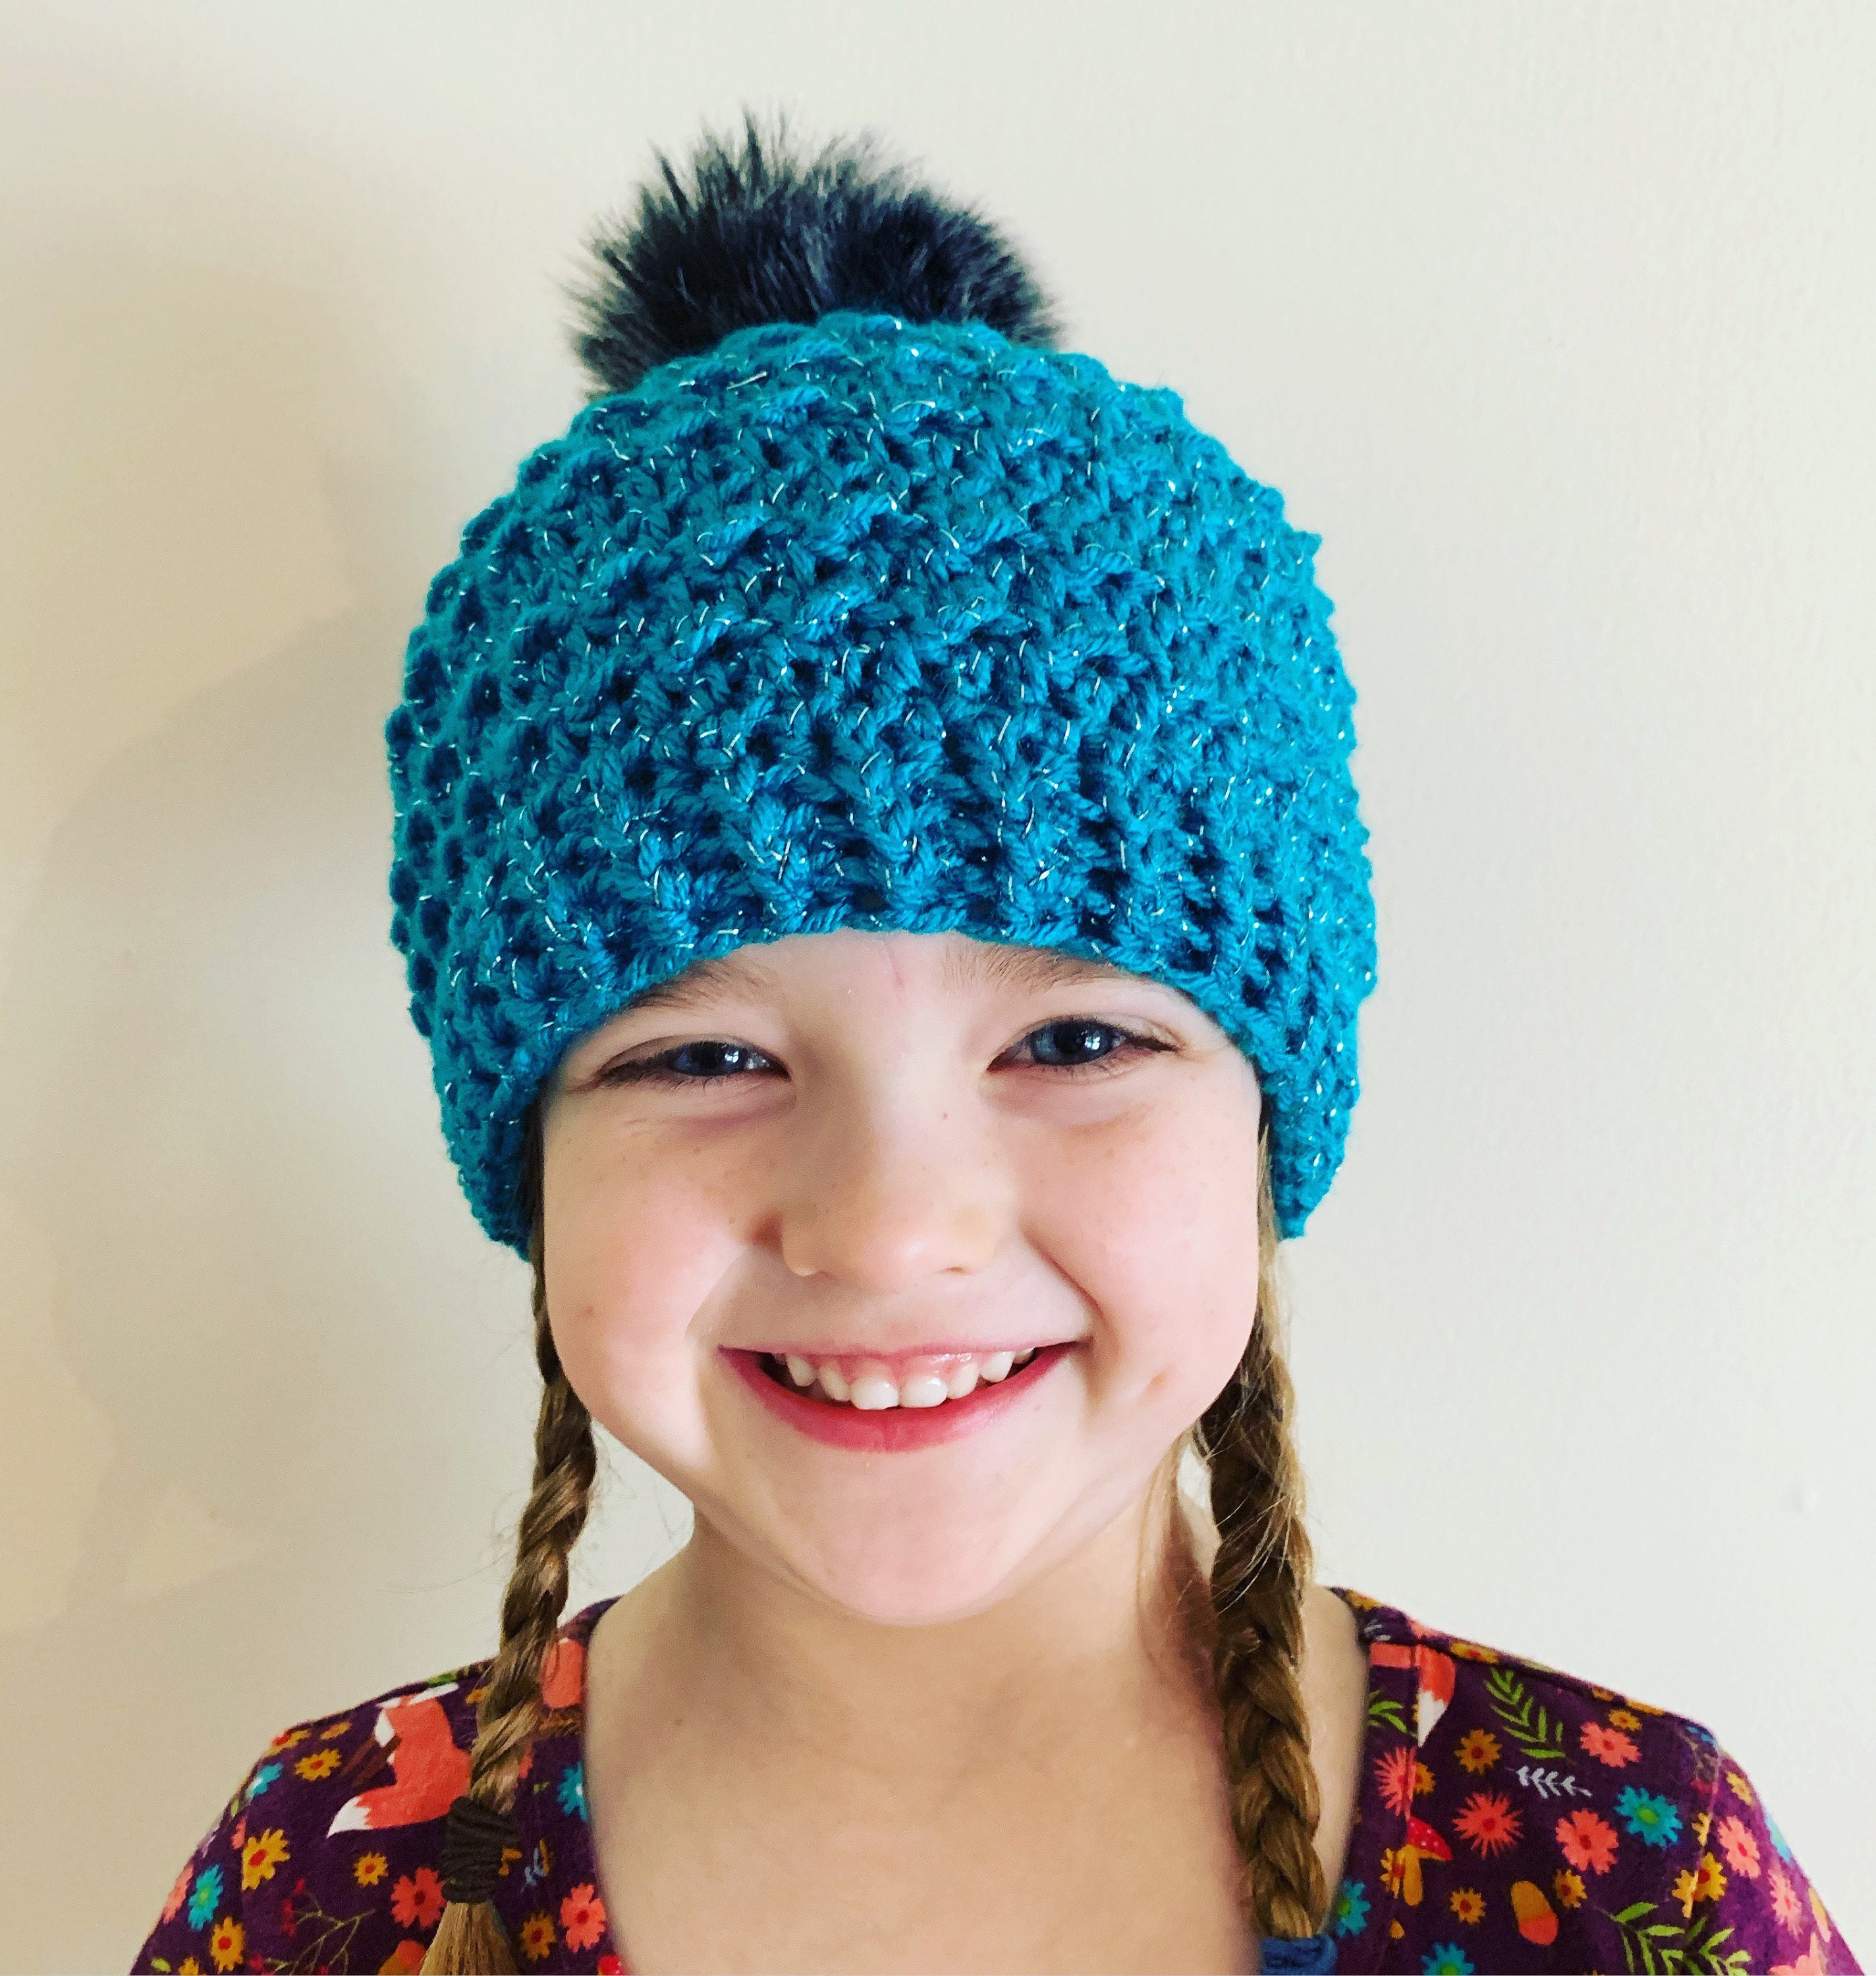 Crochet Pattern, Gender Neutral, Top Down Hat, Textured Hat, R and R ...